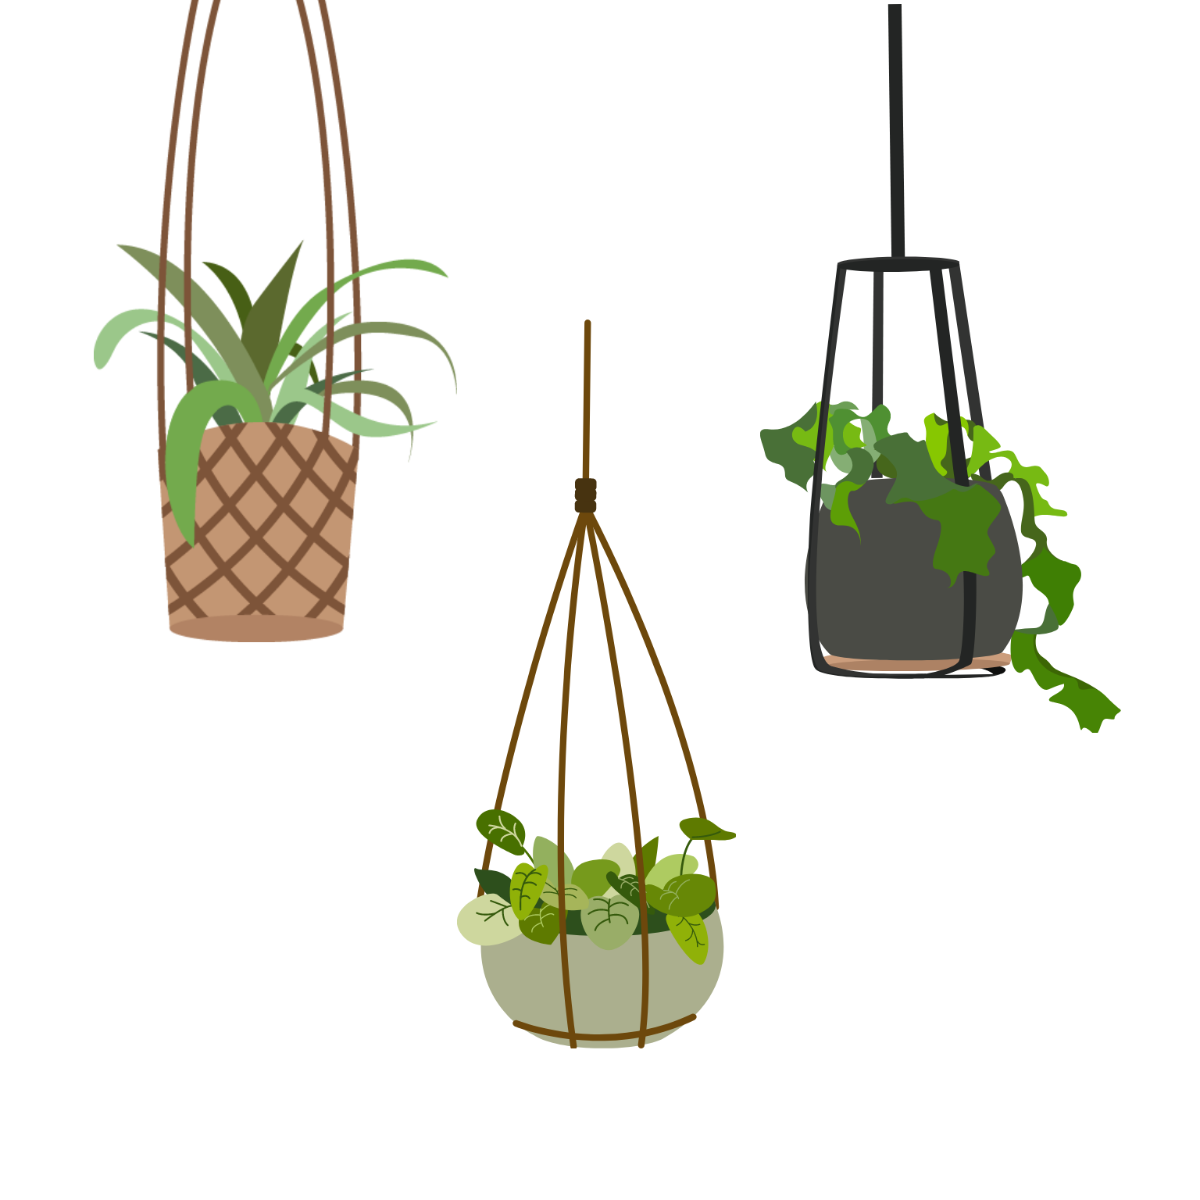 Free Hanging Plant Vector Template